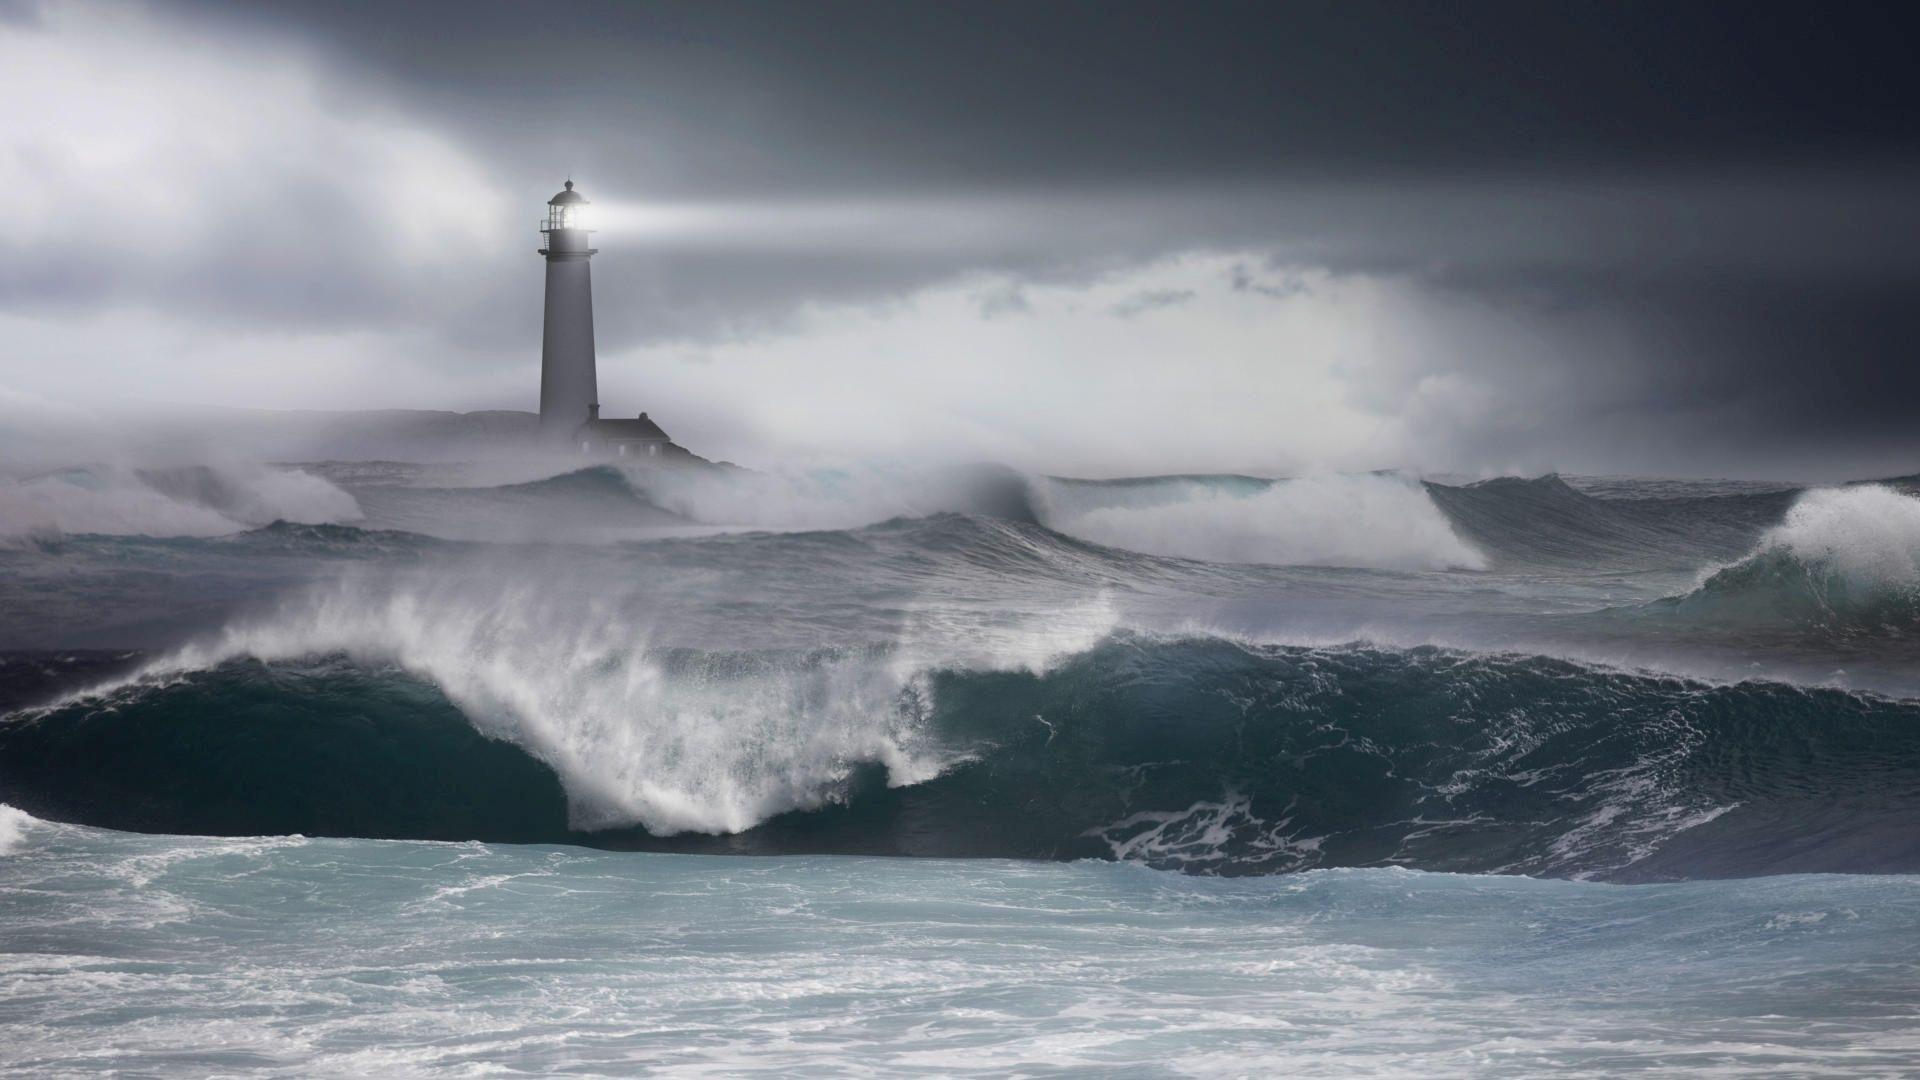 Lighthouse in the storm Wallpaper. Storm wallpaper